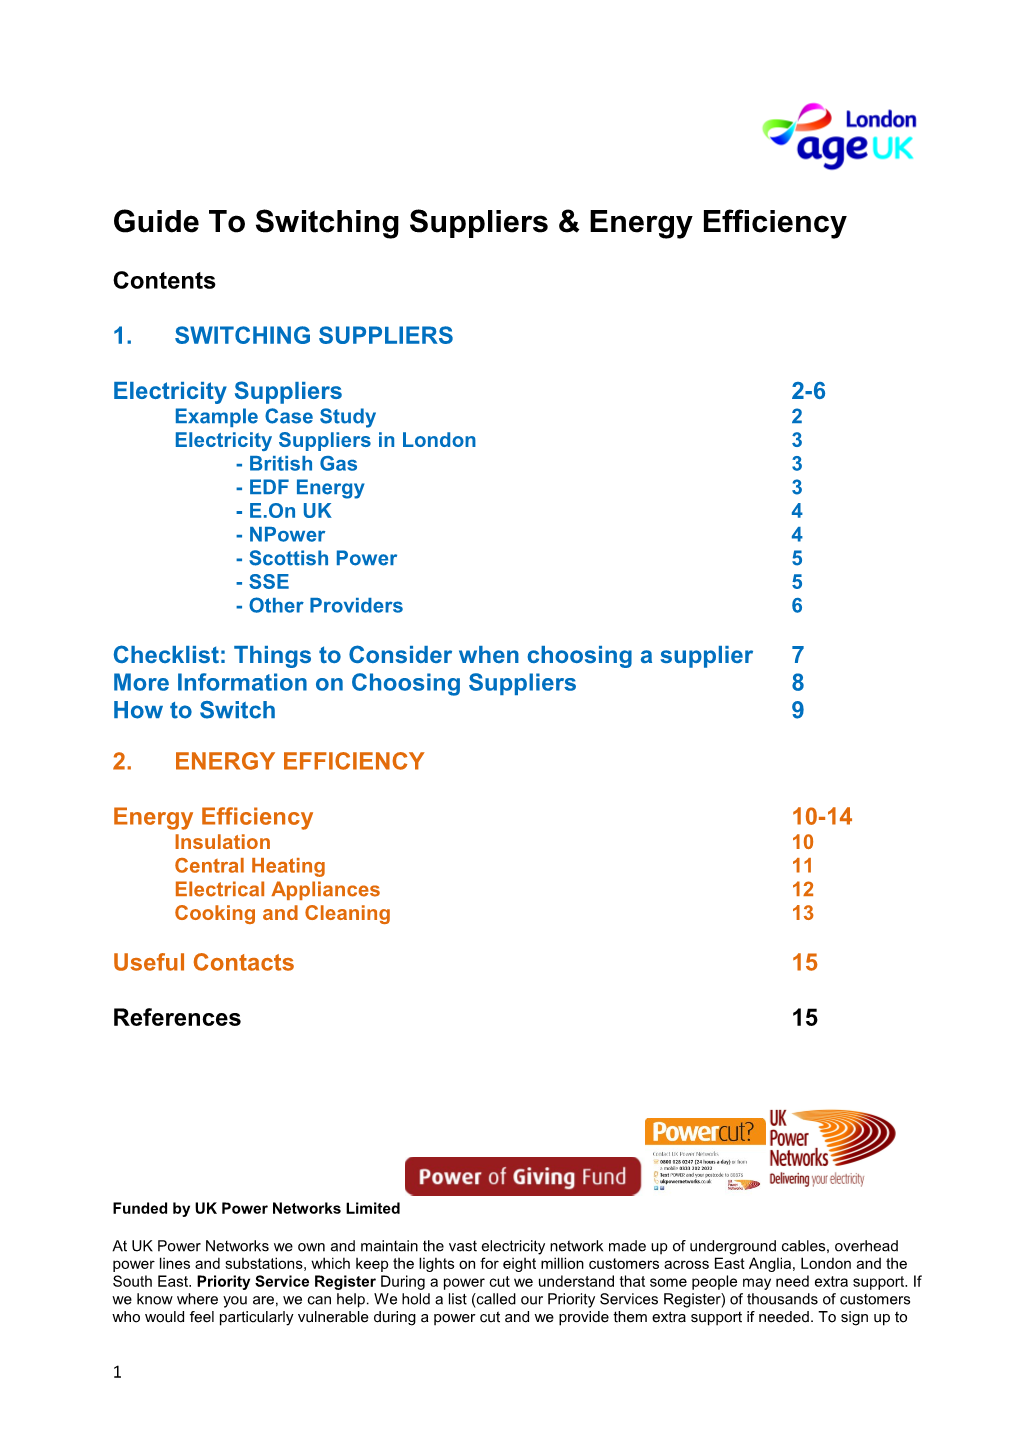 Guide to Switching Suppliers & Energy Efficiency